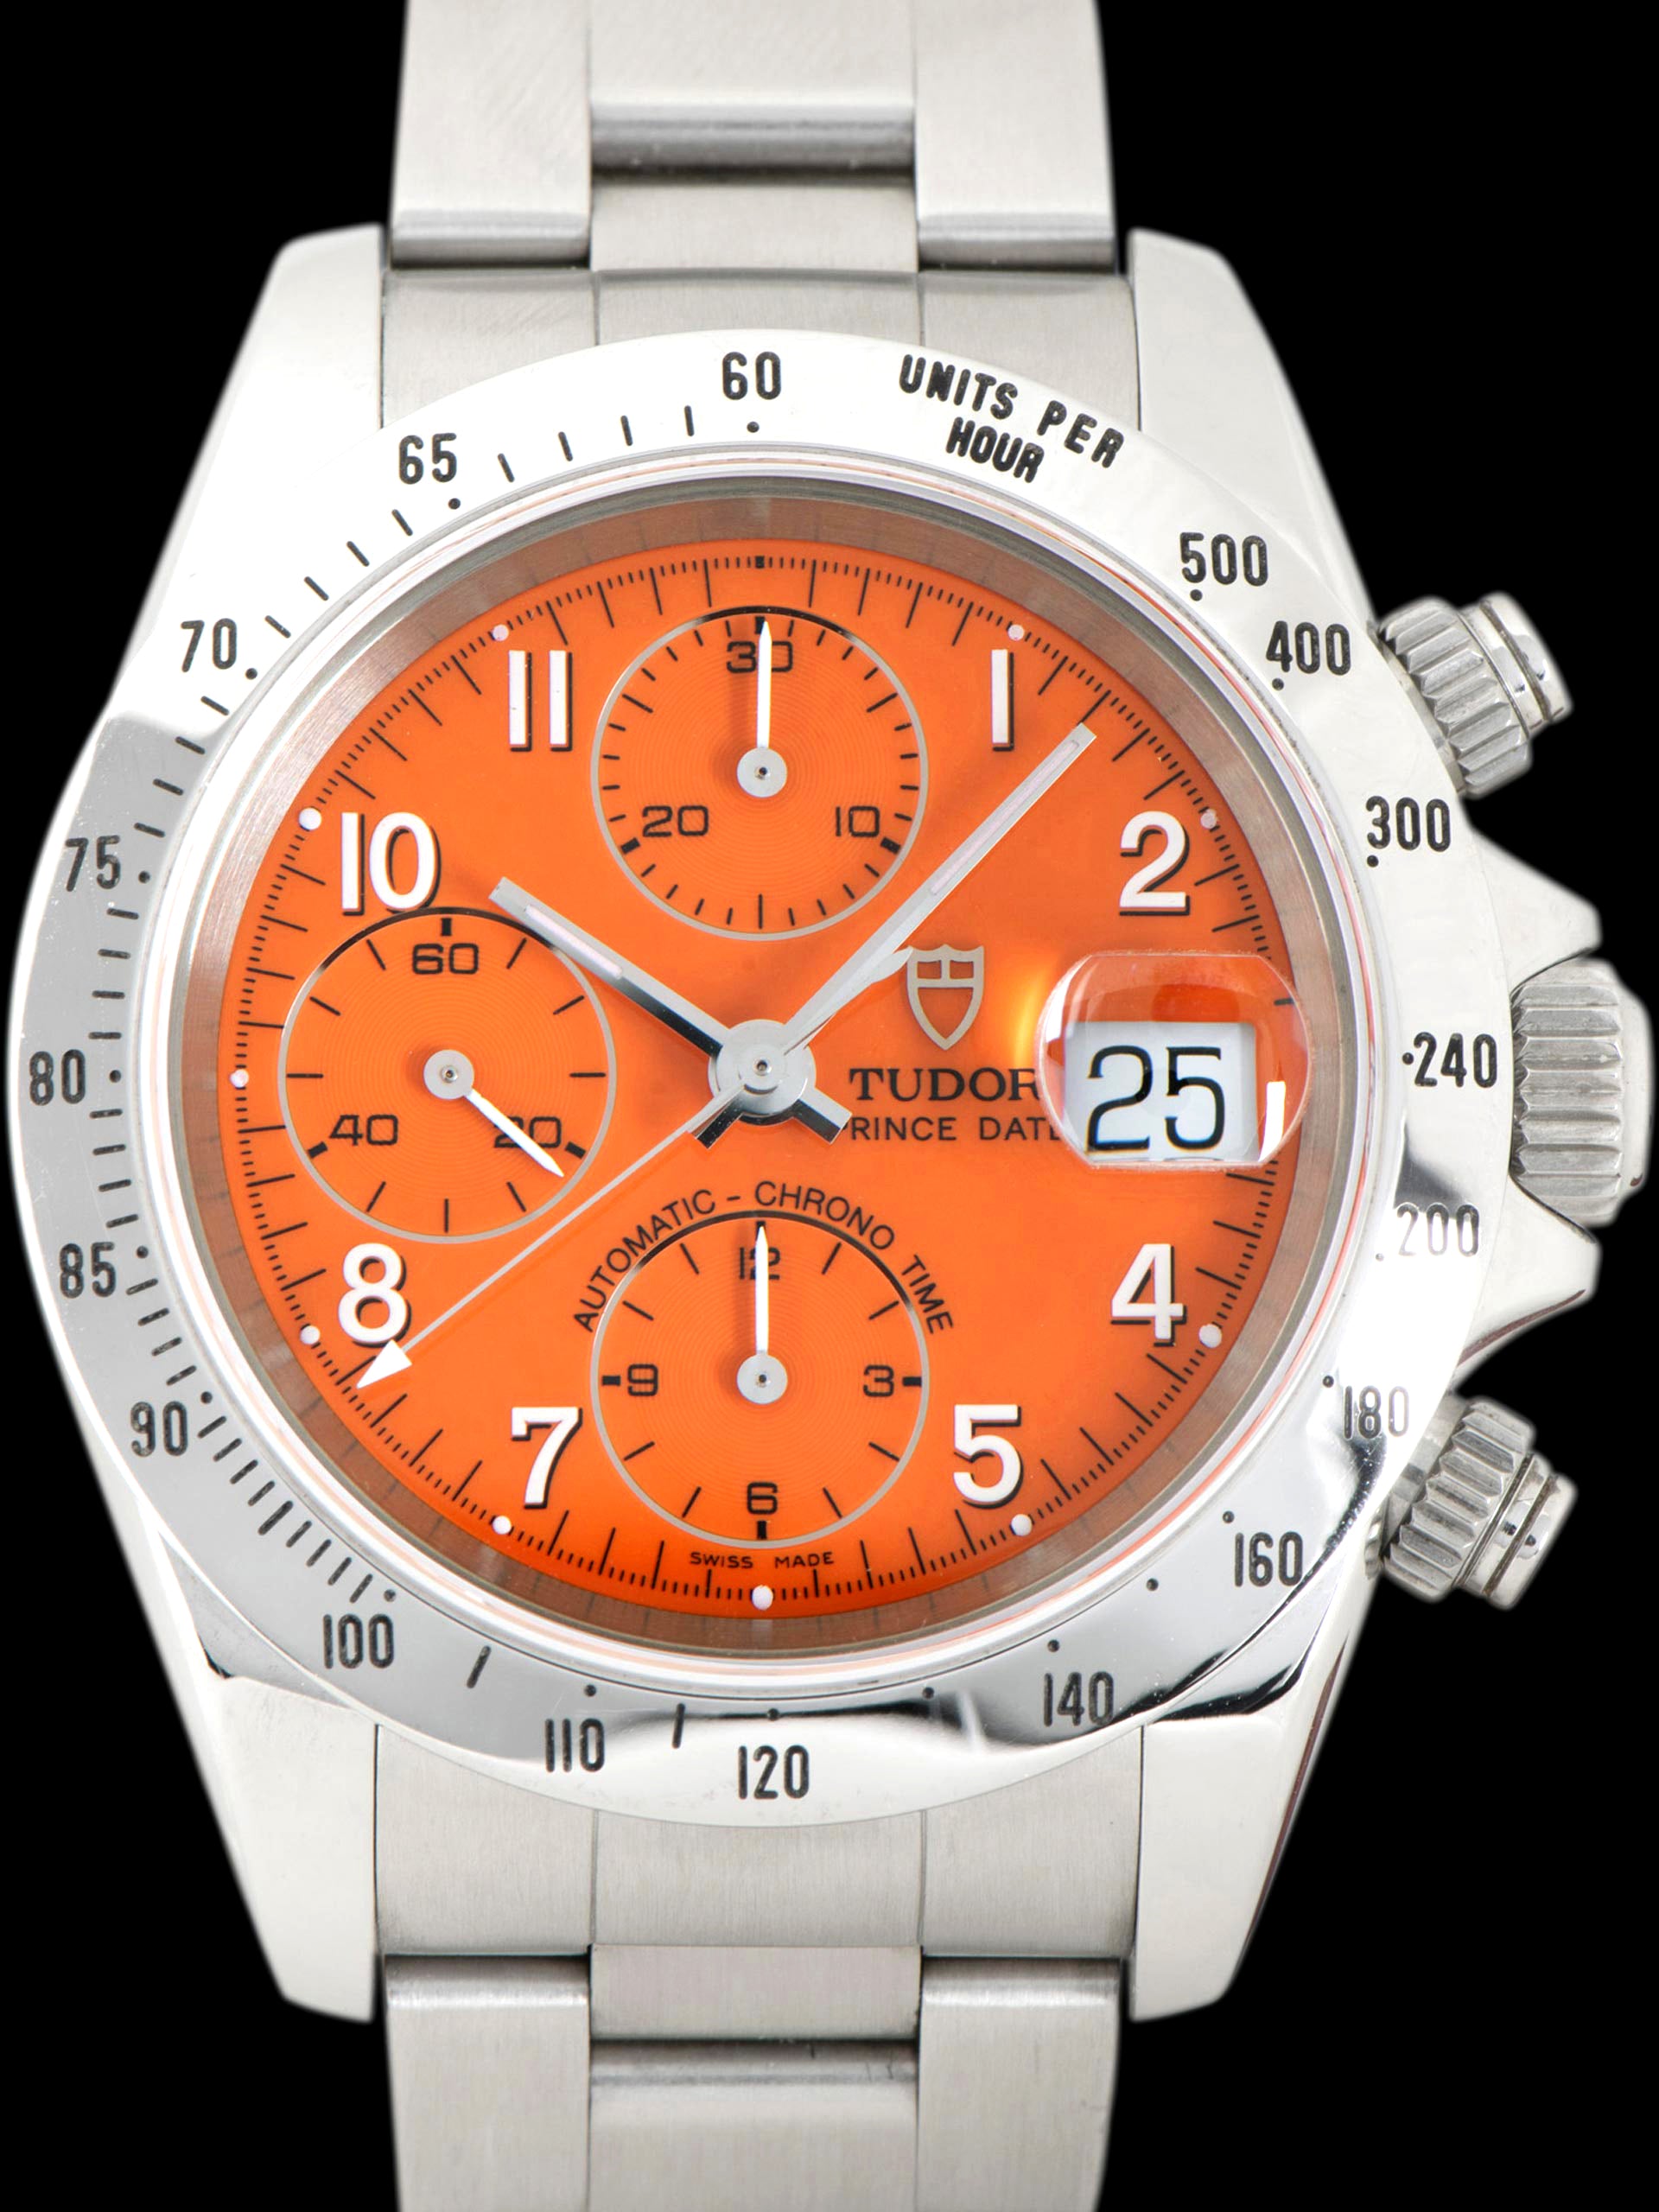 *Like New* 2004 Tudor Prince Date Chronograph (Ref. 79280P) "Orange Crush" Dial W/ Papers & Accessories